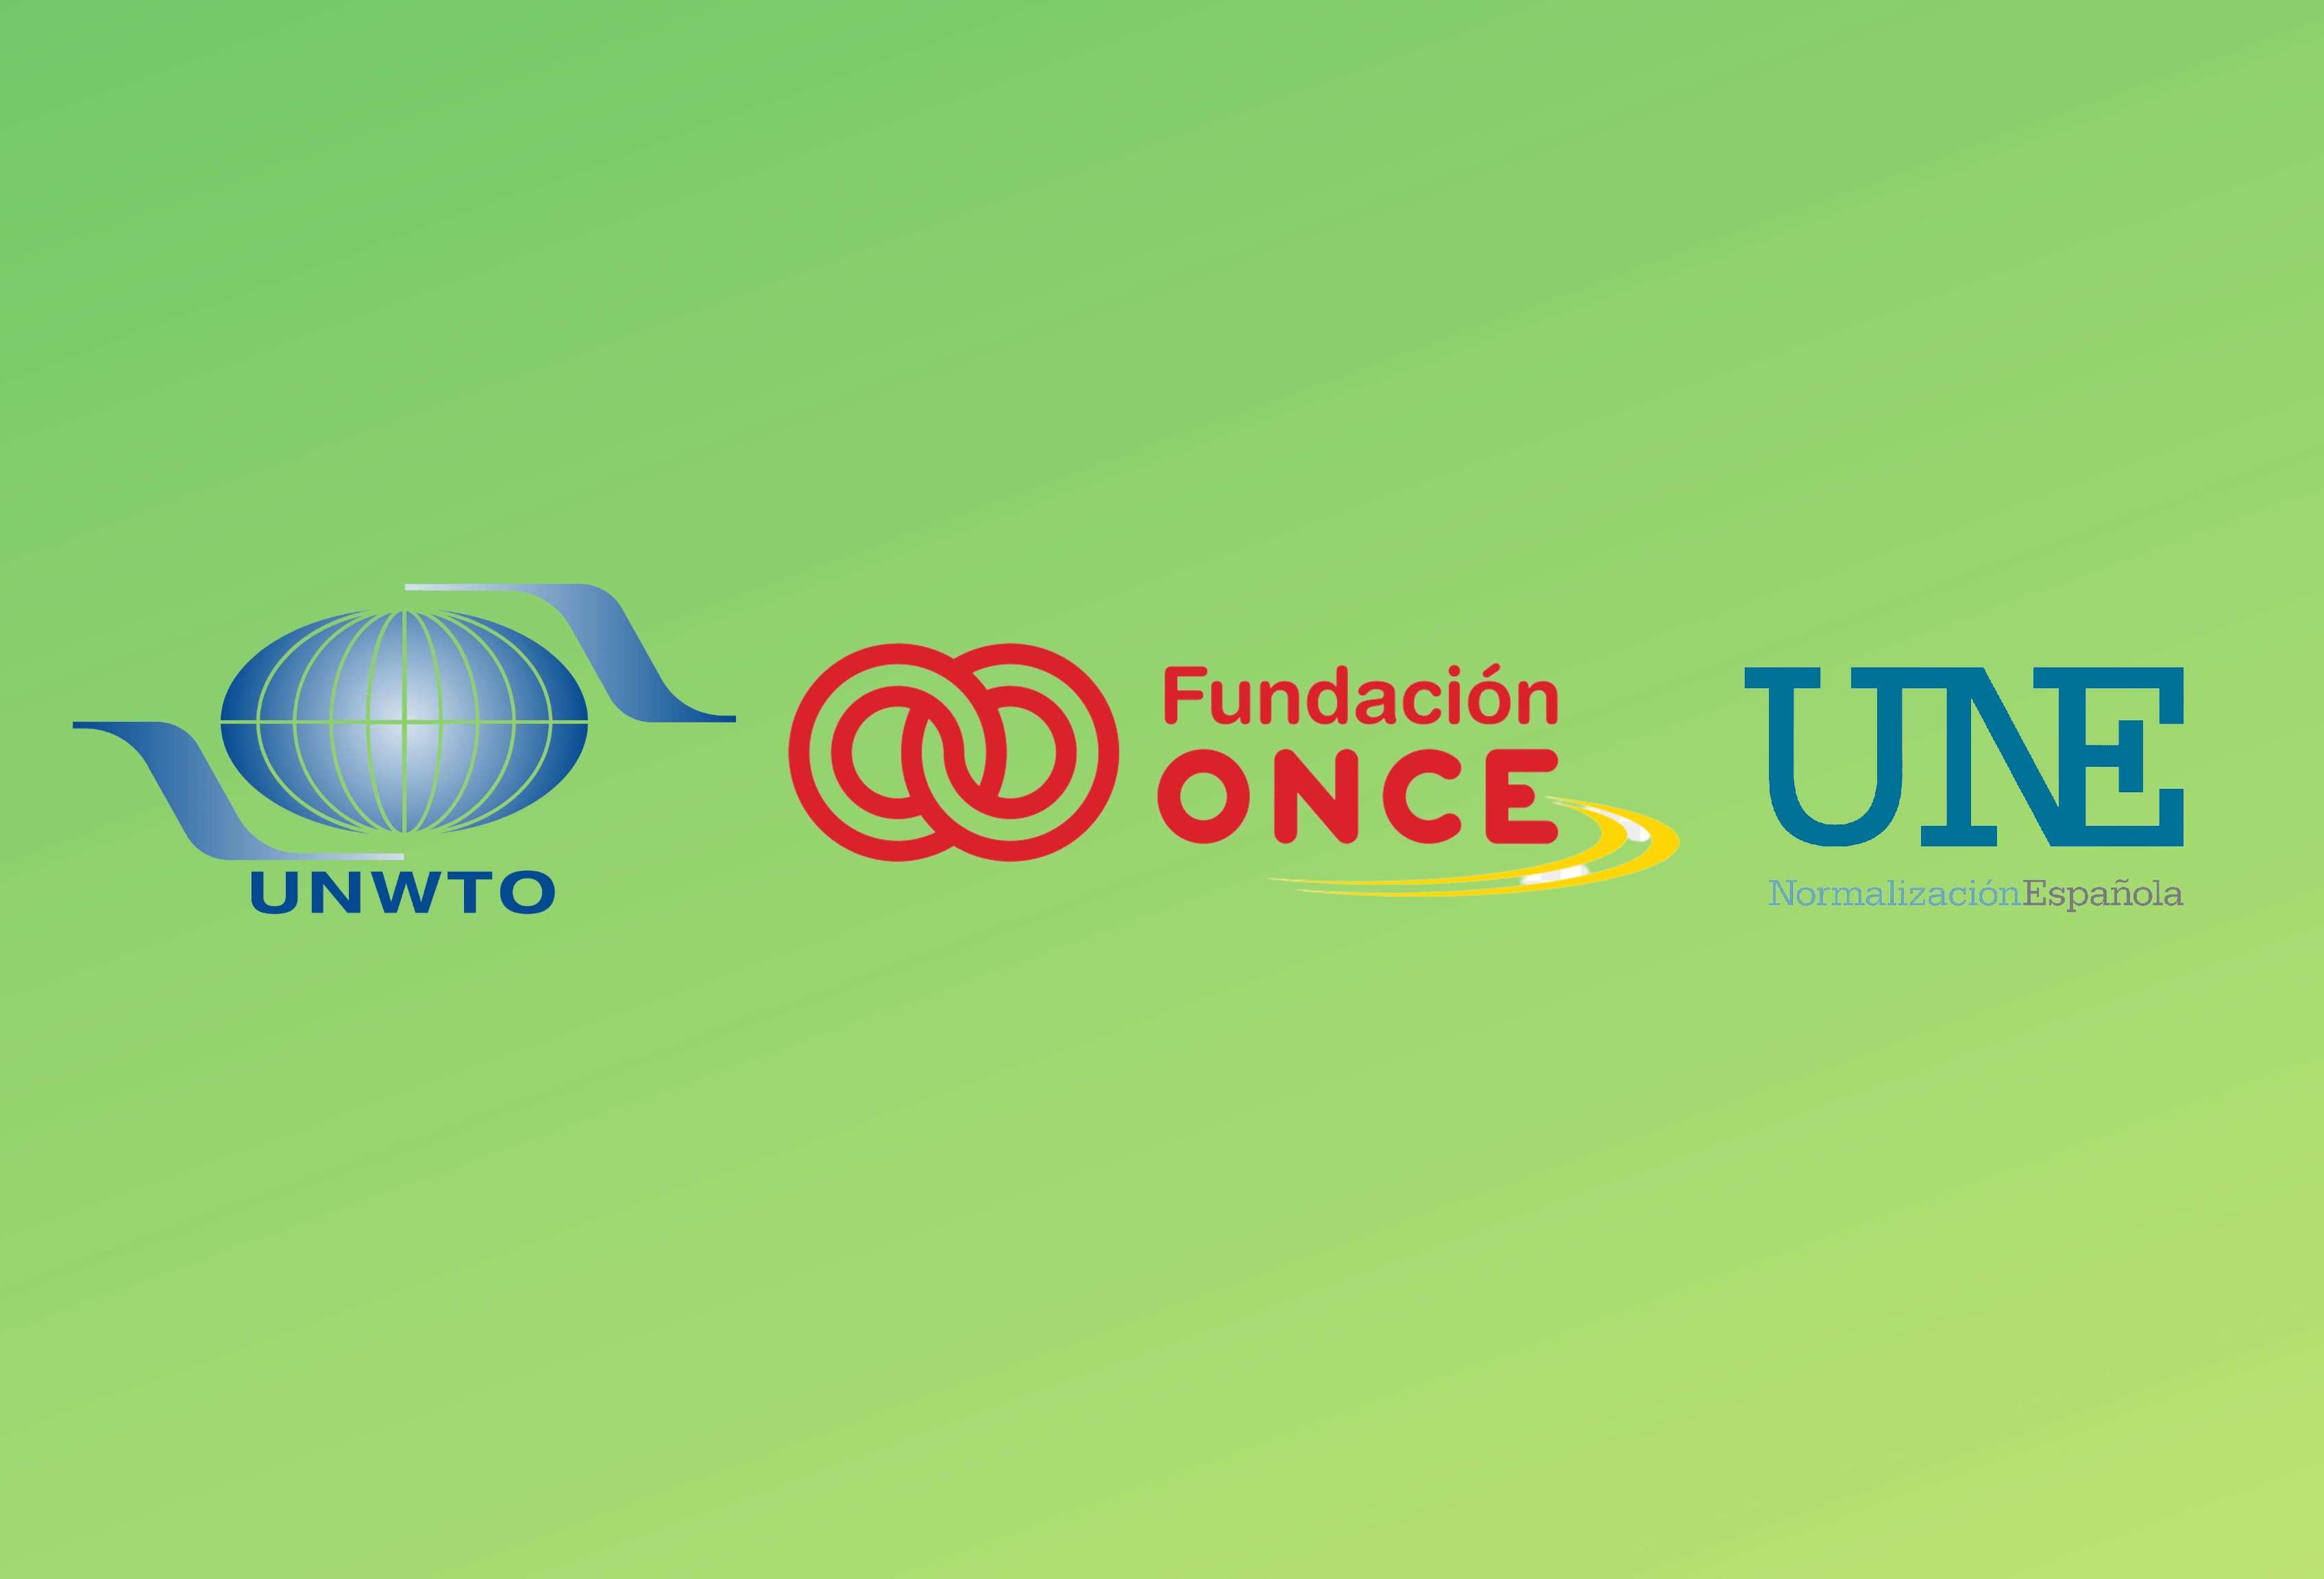 UNWTO, Fundacion ONCE and UNE logos